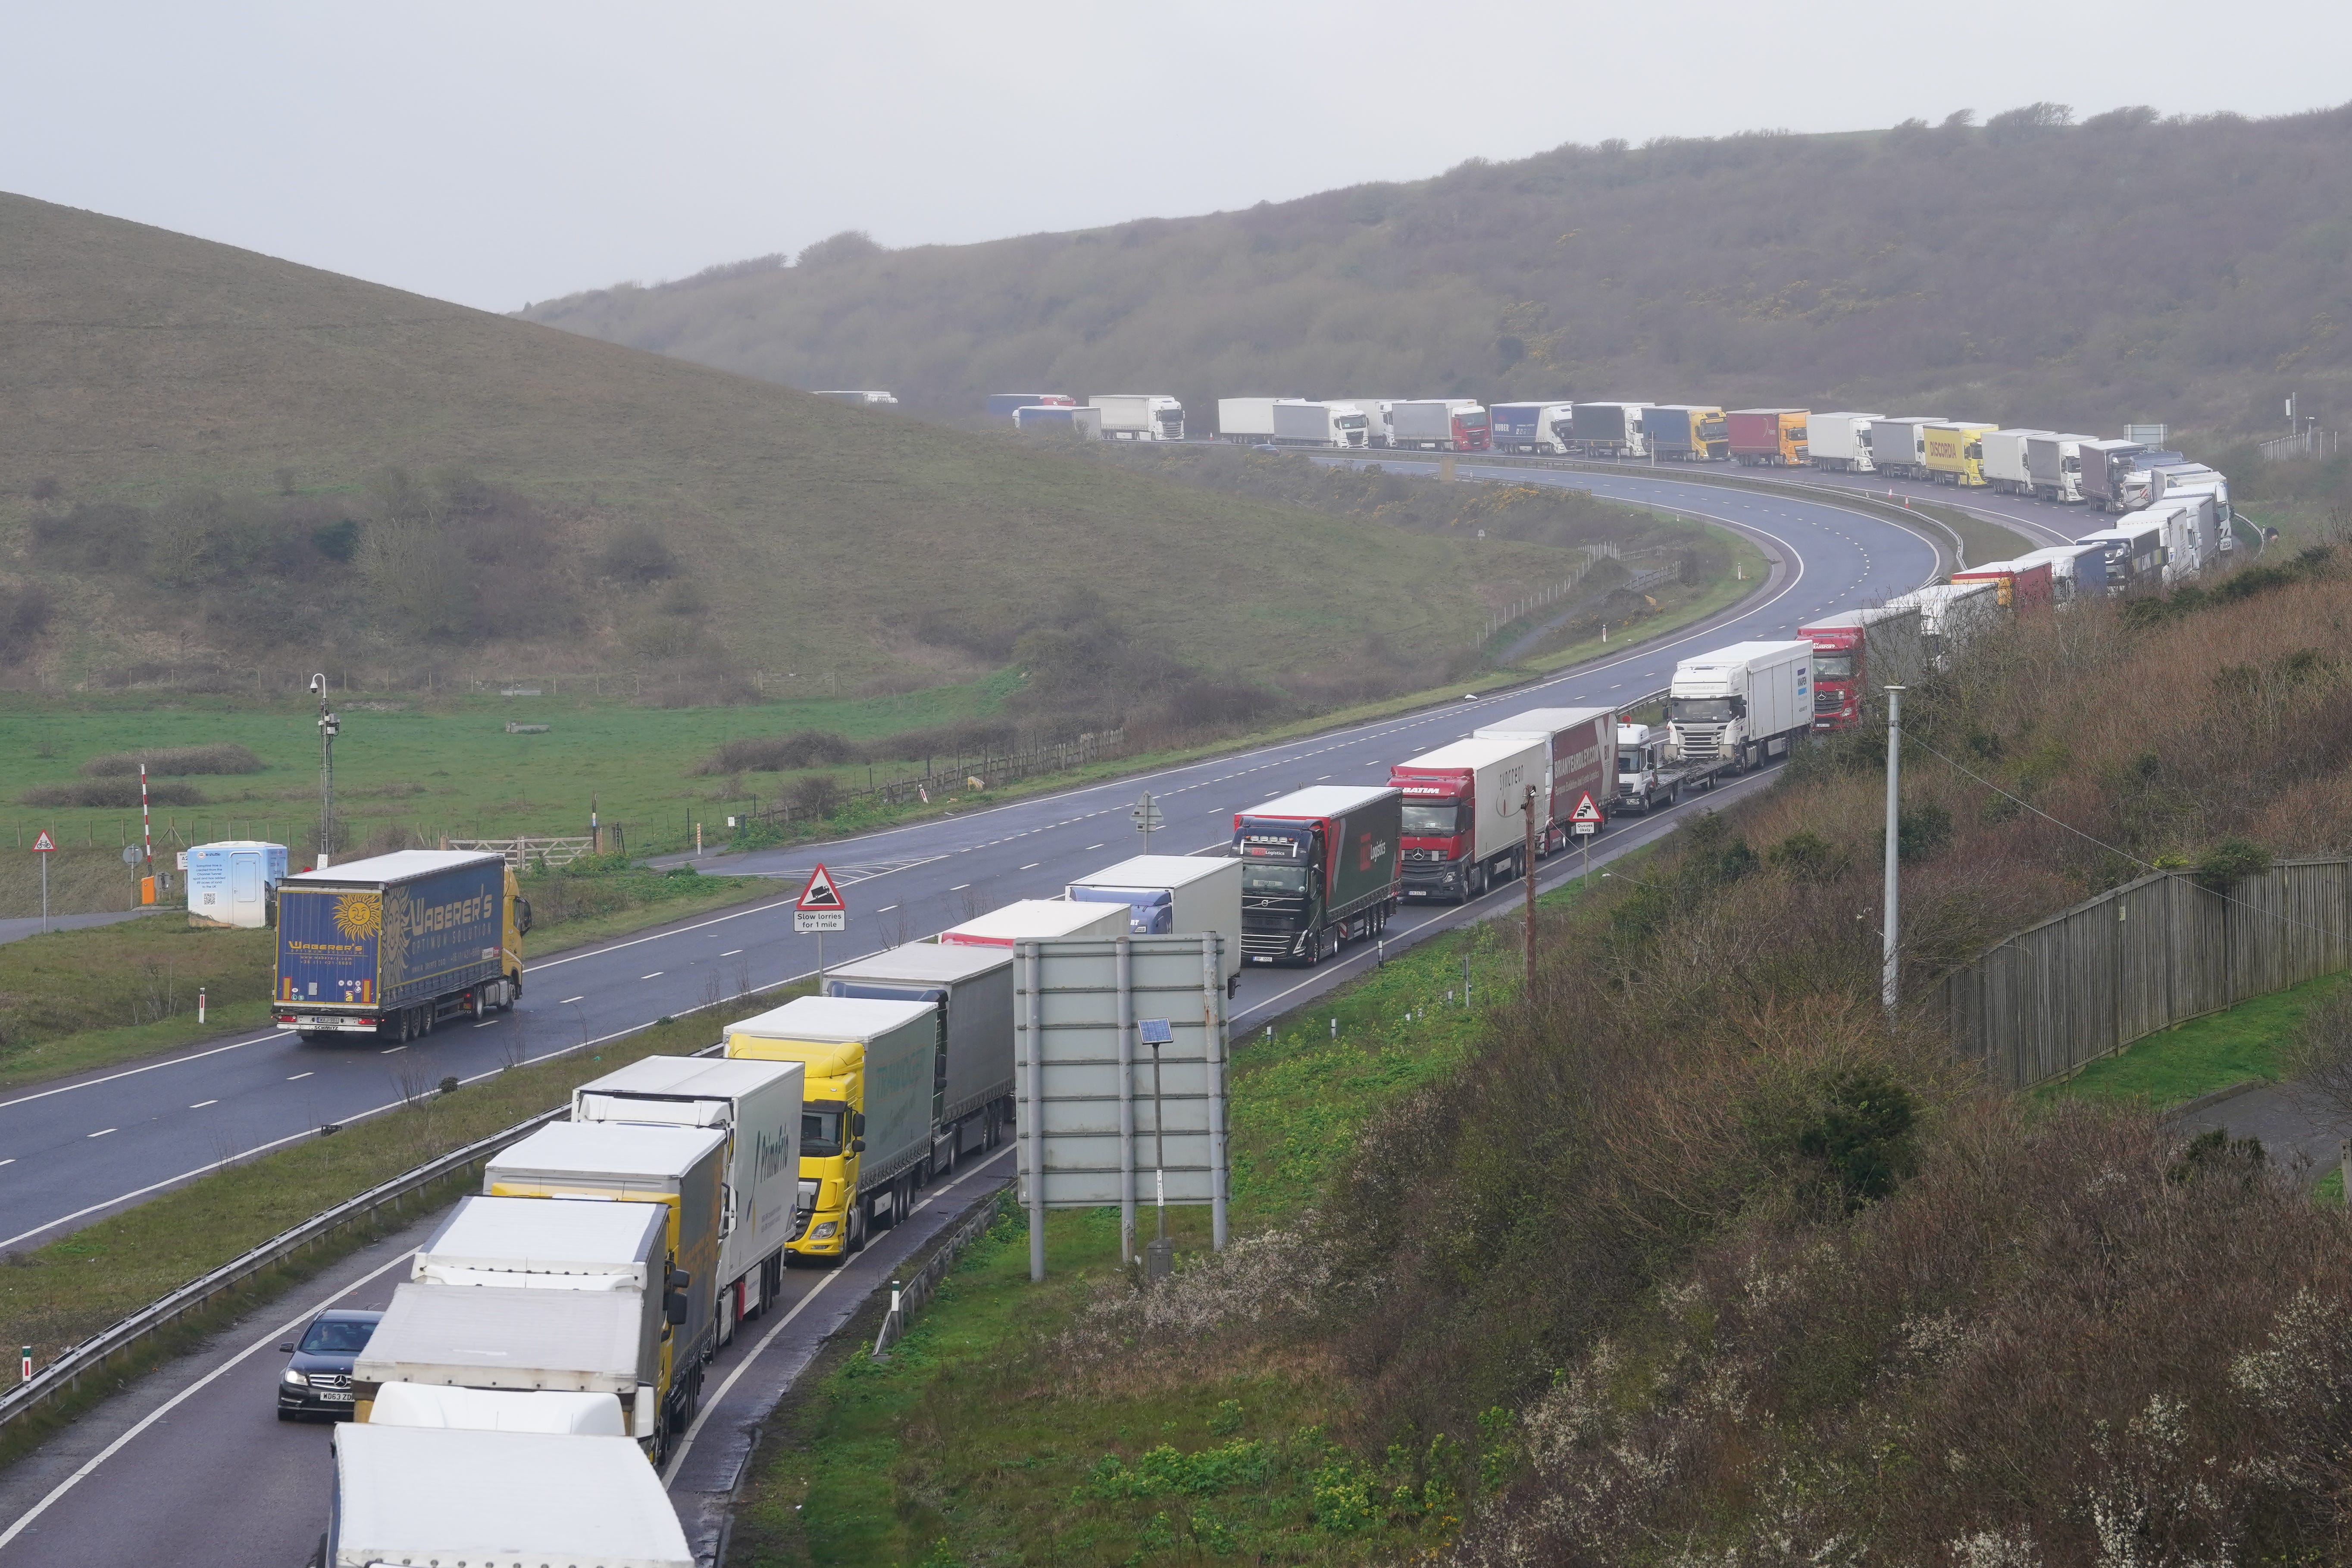 Lorries queueing on the A20 to get to the Port of Dover in Kent as the Easter getaway begins. The Port of Dover declared a critical incident as high levels of traffic caused coach passengers to experience lengthy delays. It comes as operators P&O Ferries and DFDS Seaways also reported delays to ferry and coach services, citing bad weather and hold-ups at French border controls as partly responsible for waits and queues. Picture date: Saturday April 1, 2023.